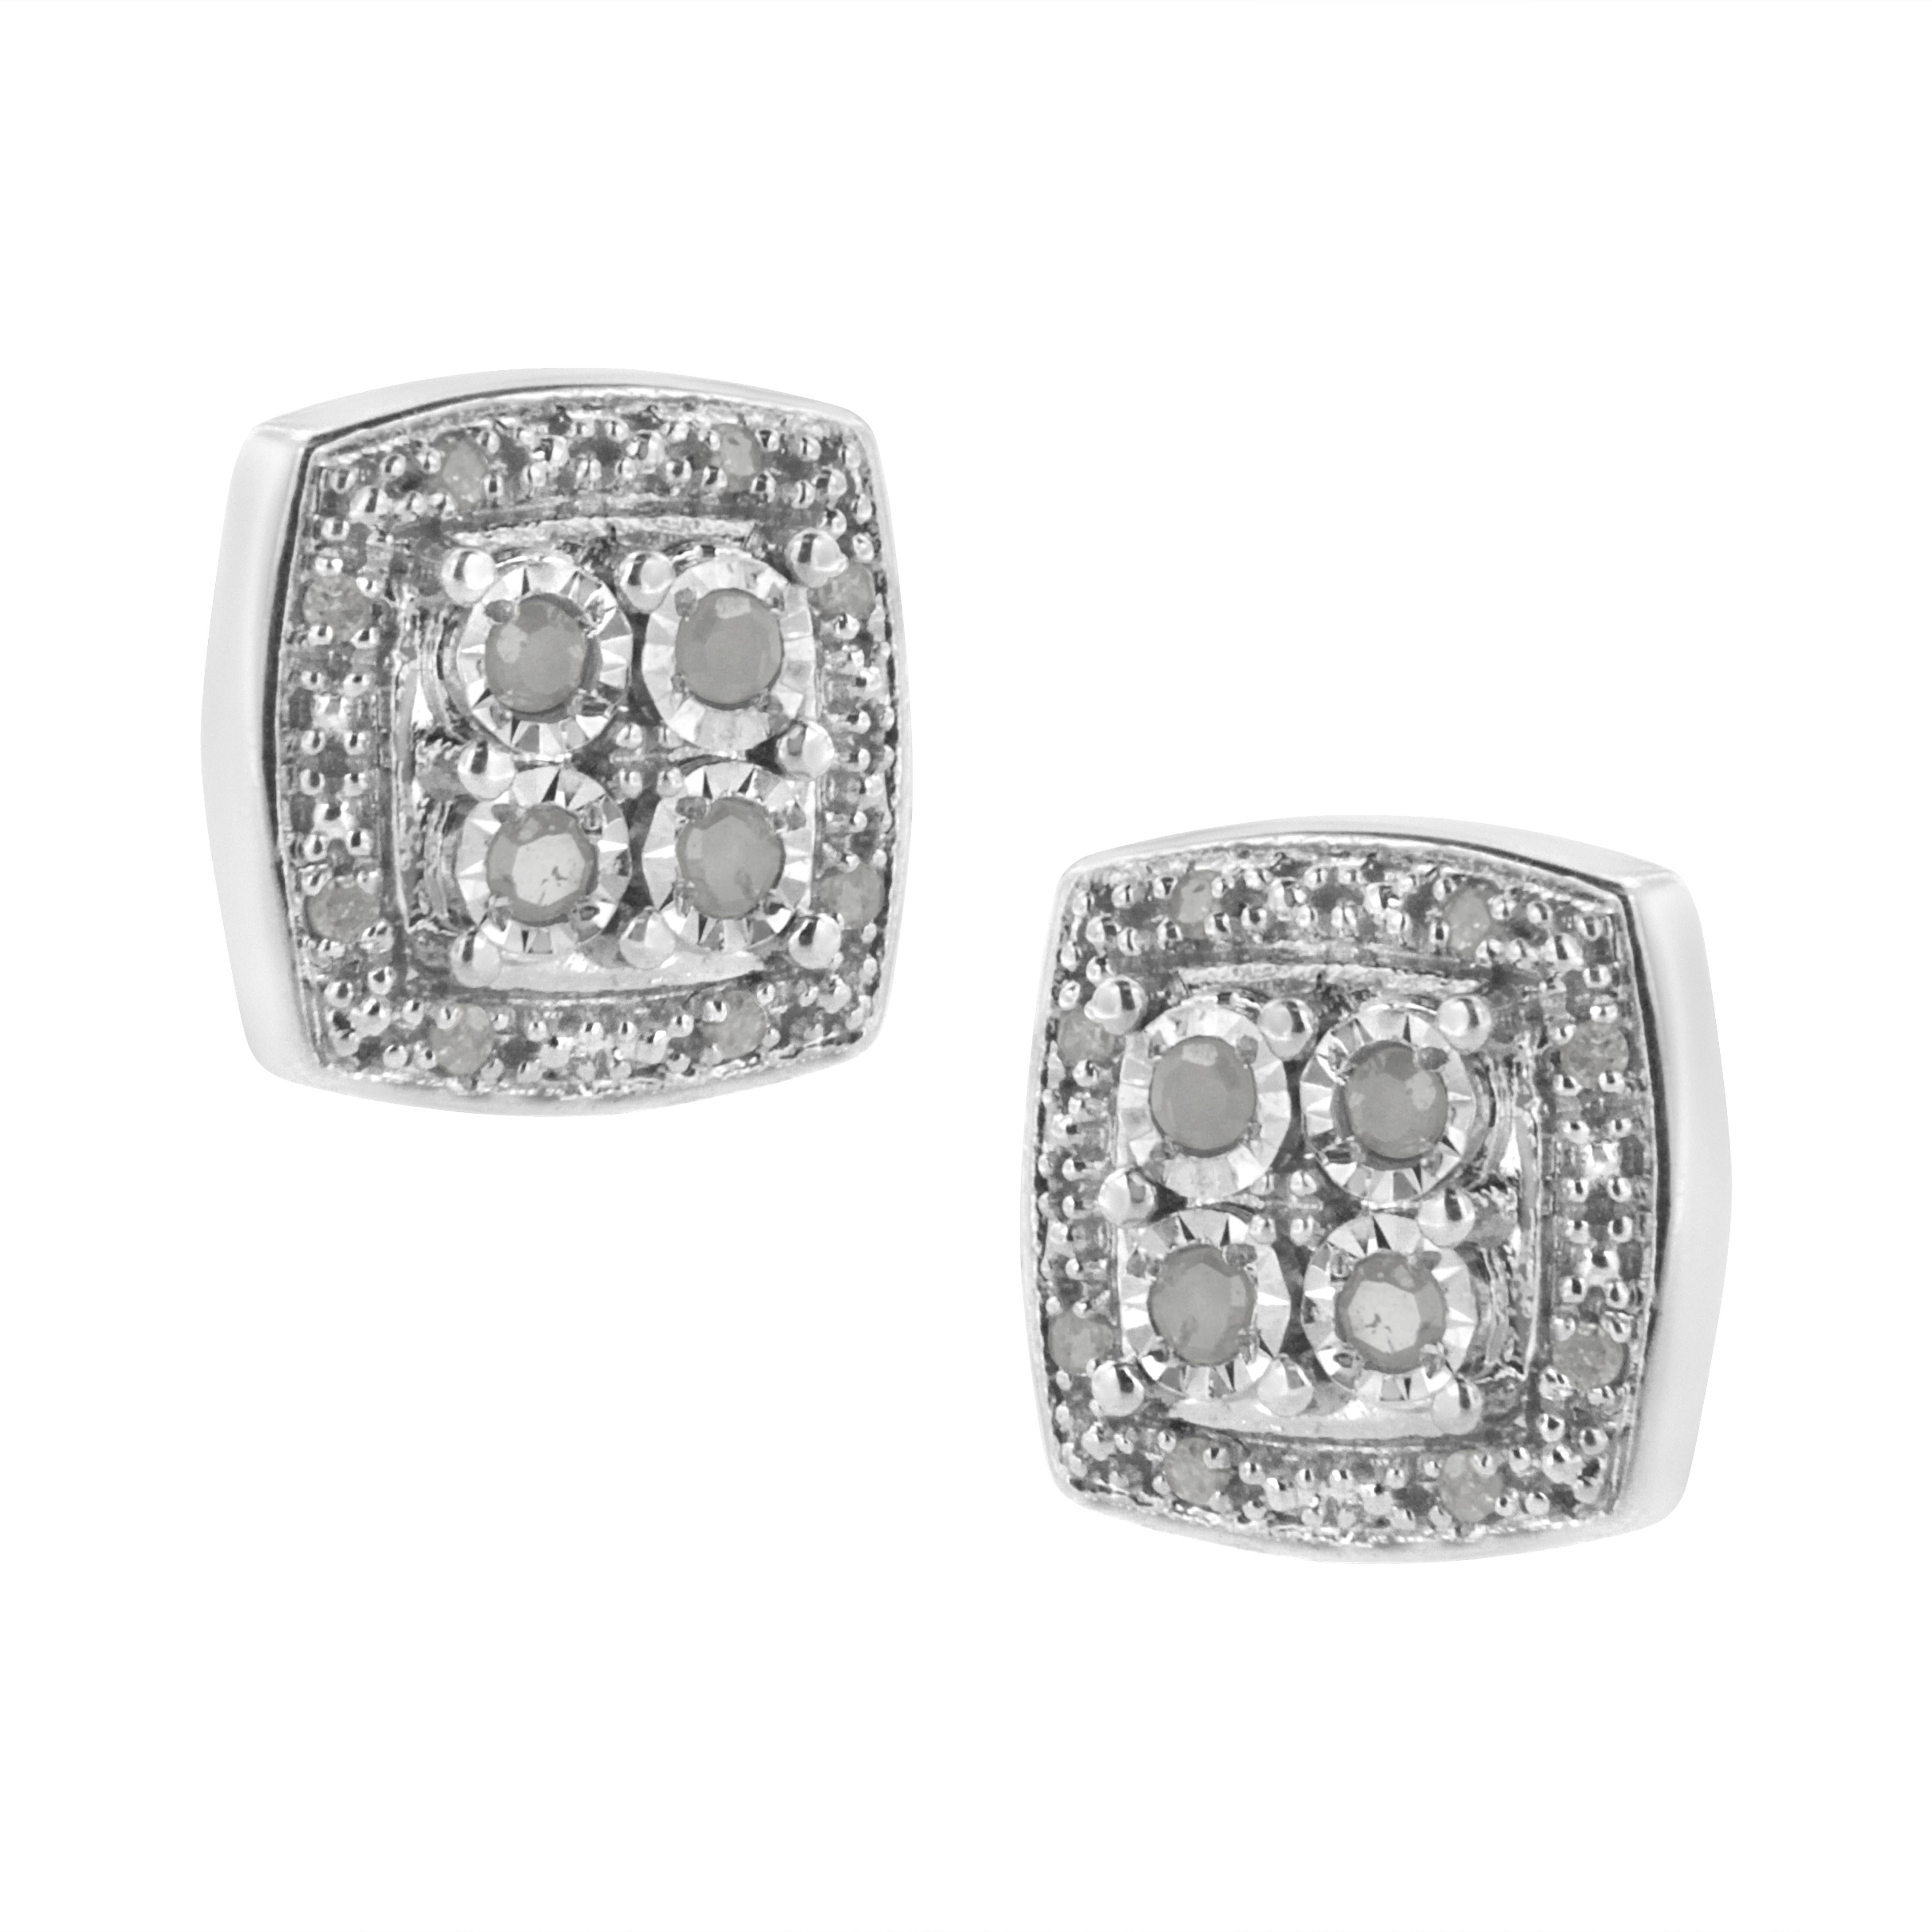 These gorgeous pair of square shaped studs are crafted in the finest .925 sterling silver and boasts 1/4 ct tdw of natural, sparkling diamonds. At the center of this piece sits 4 round-cut diamonds each, surrounded by 8 smaller, round-cut diamonds